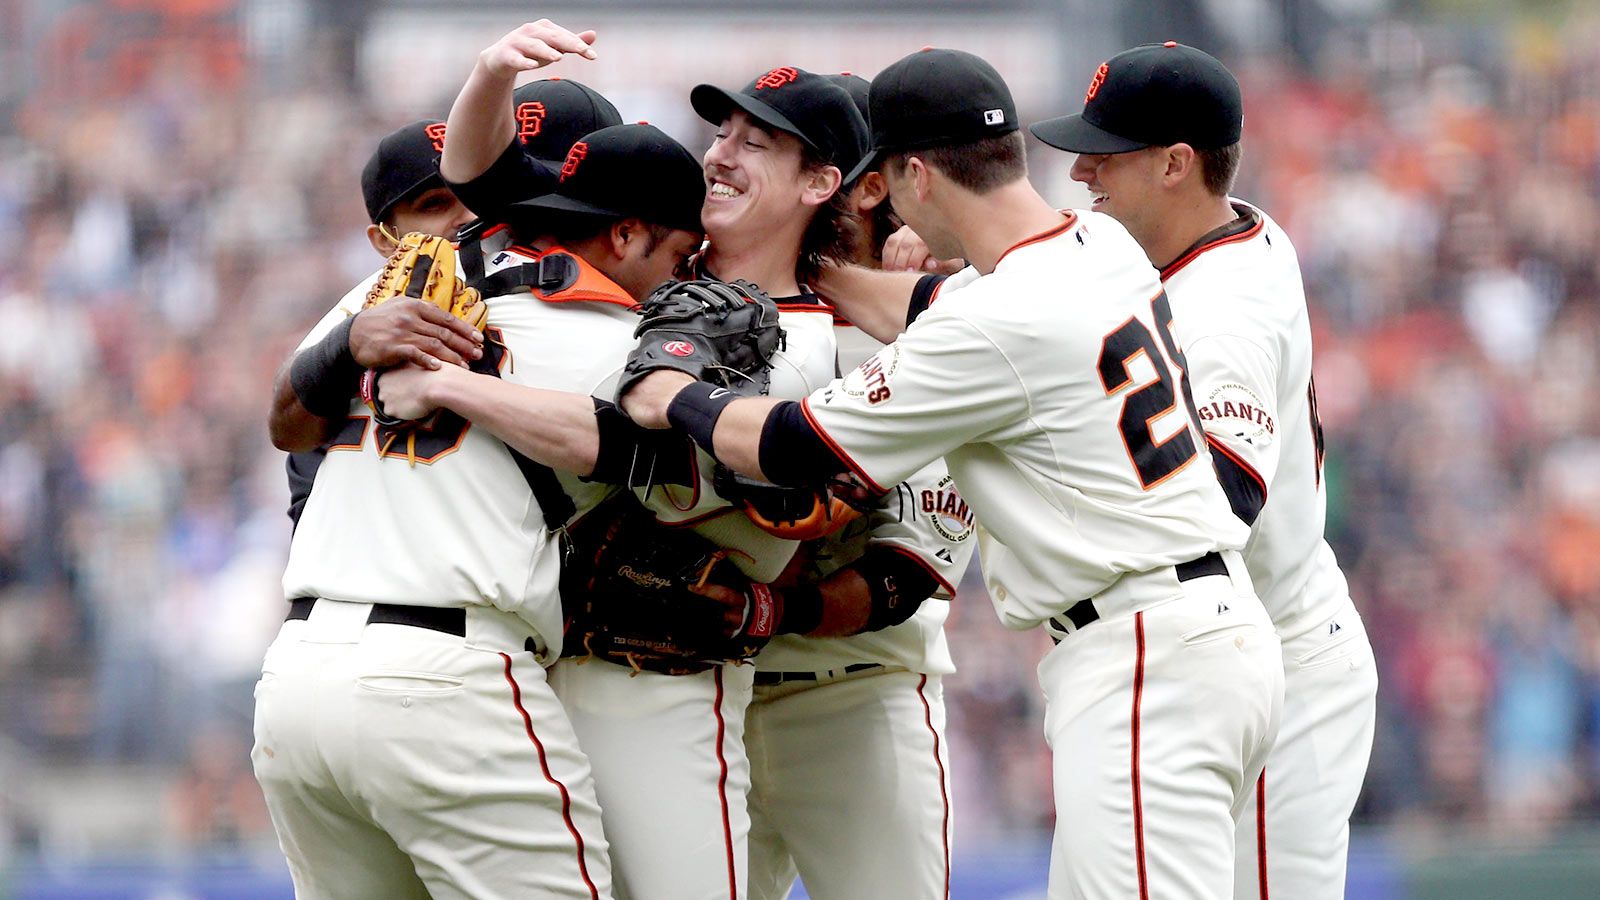 Will the Giants use Tim Lincecum at all this postseason